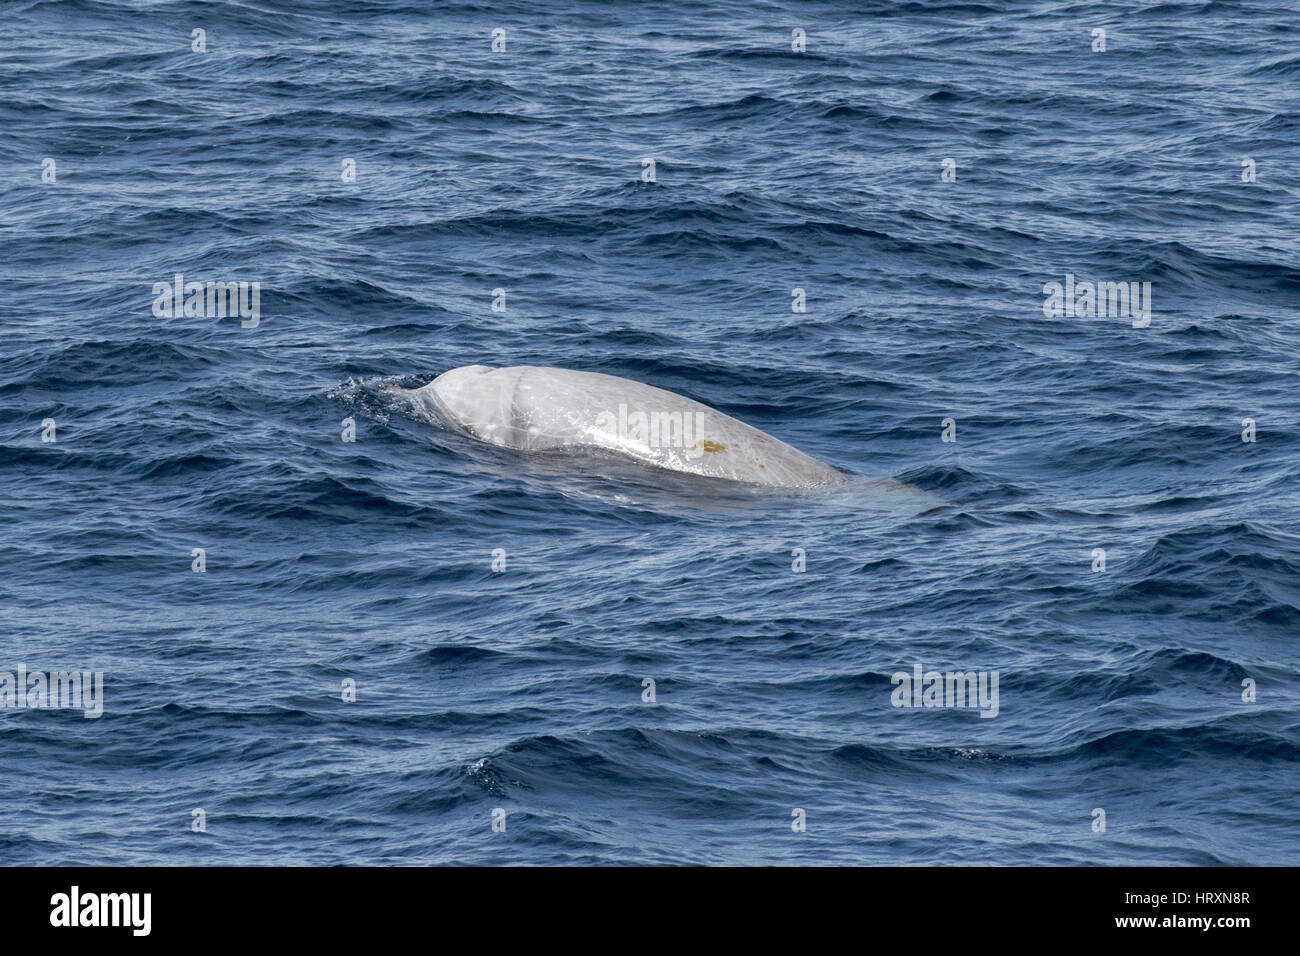 Male Cuvier's beaked whale or goose-beaked whale, Ziphius cavirostris, surfacing, showing teeth, several hundred miles off Mauritania, North Africa Stock Photo